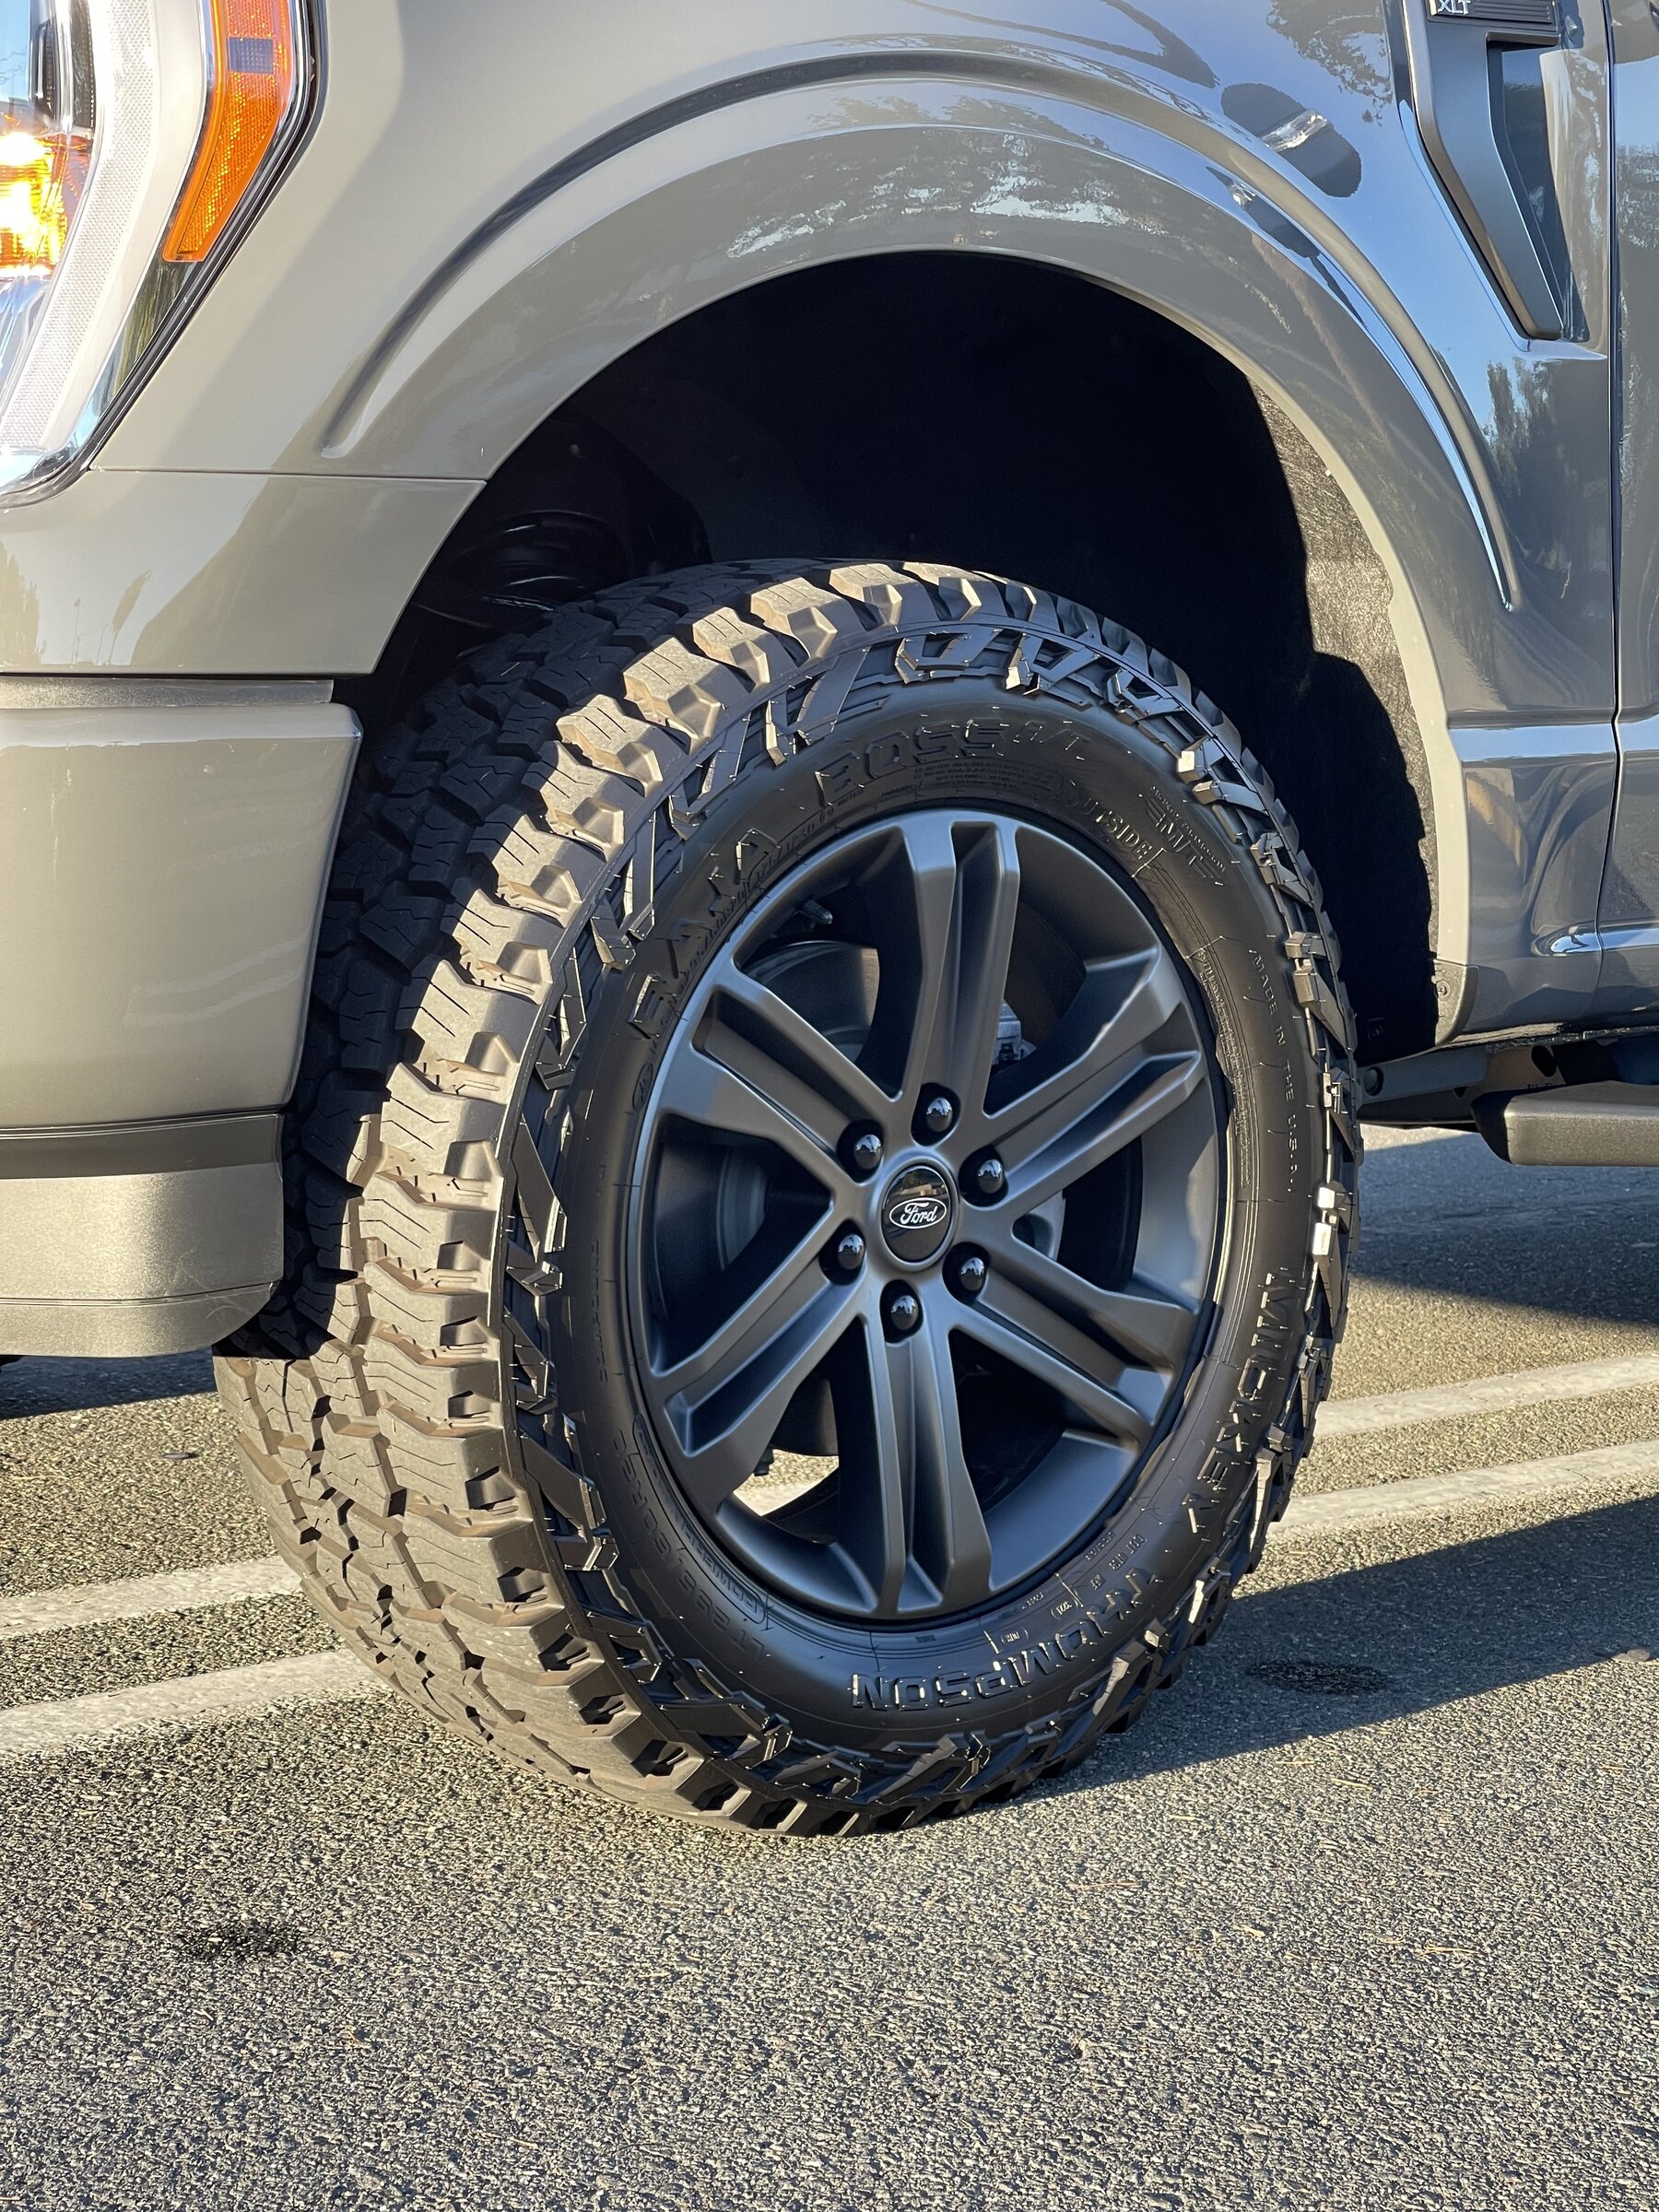 Factory Wheels with Aftermarket Tire Thread | Page 43 | ⚡️ F-150 Lightning  Forum For Owners, News, Discussions